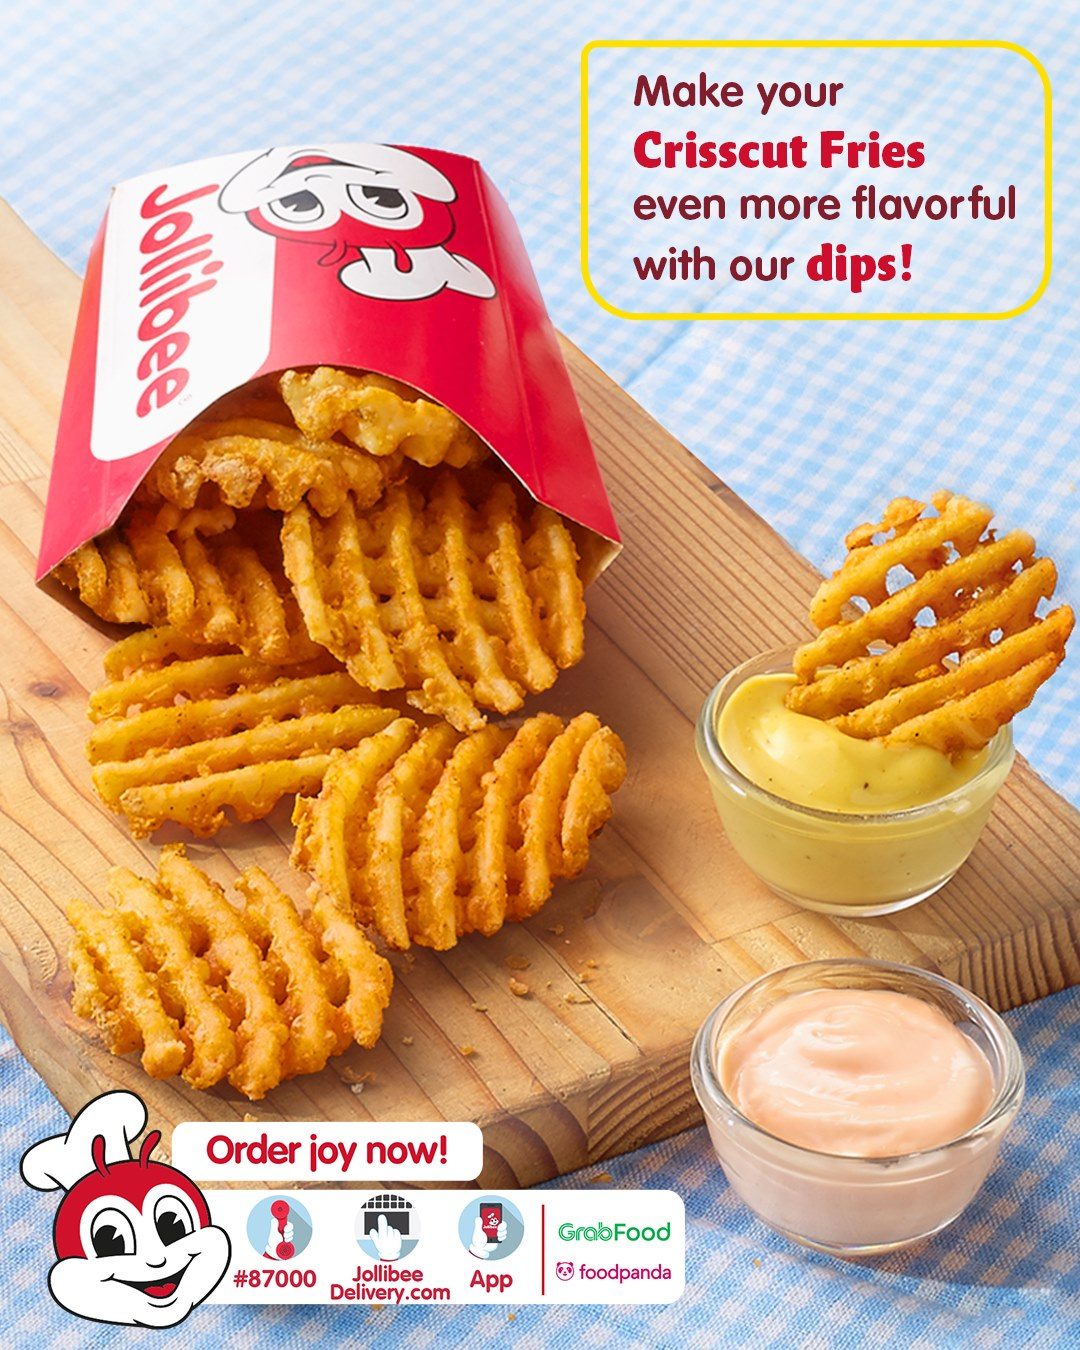 Jollibee Crisscut Fries now comes with dips